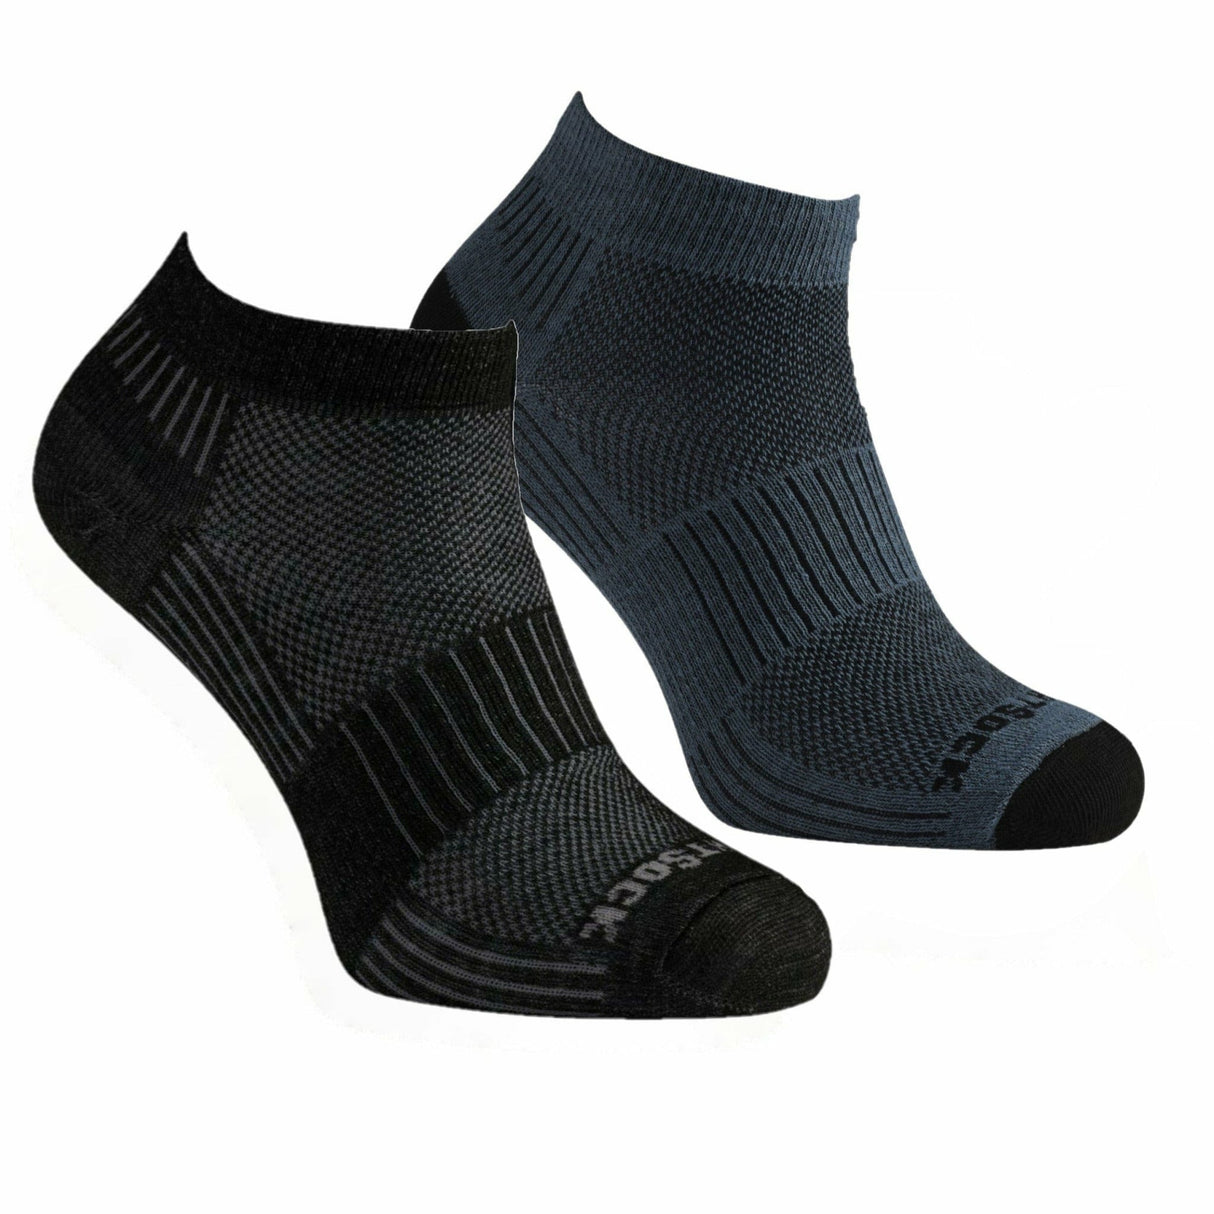 Wrightsock Double-Layer Coolmesh II Lightweight Lo Socks  -  Small / Black/Gray / 2-Pair Pack